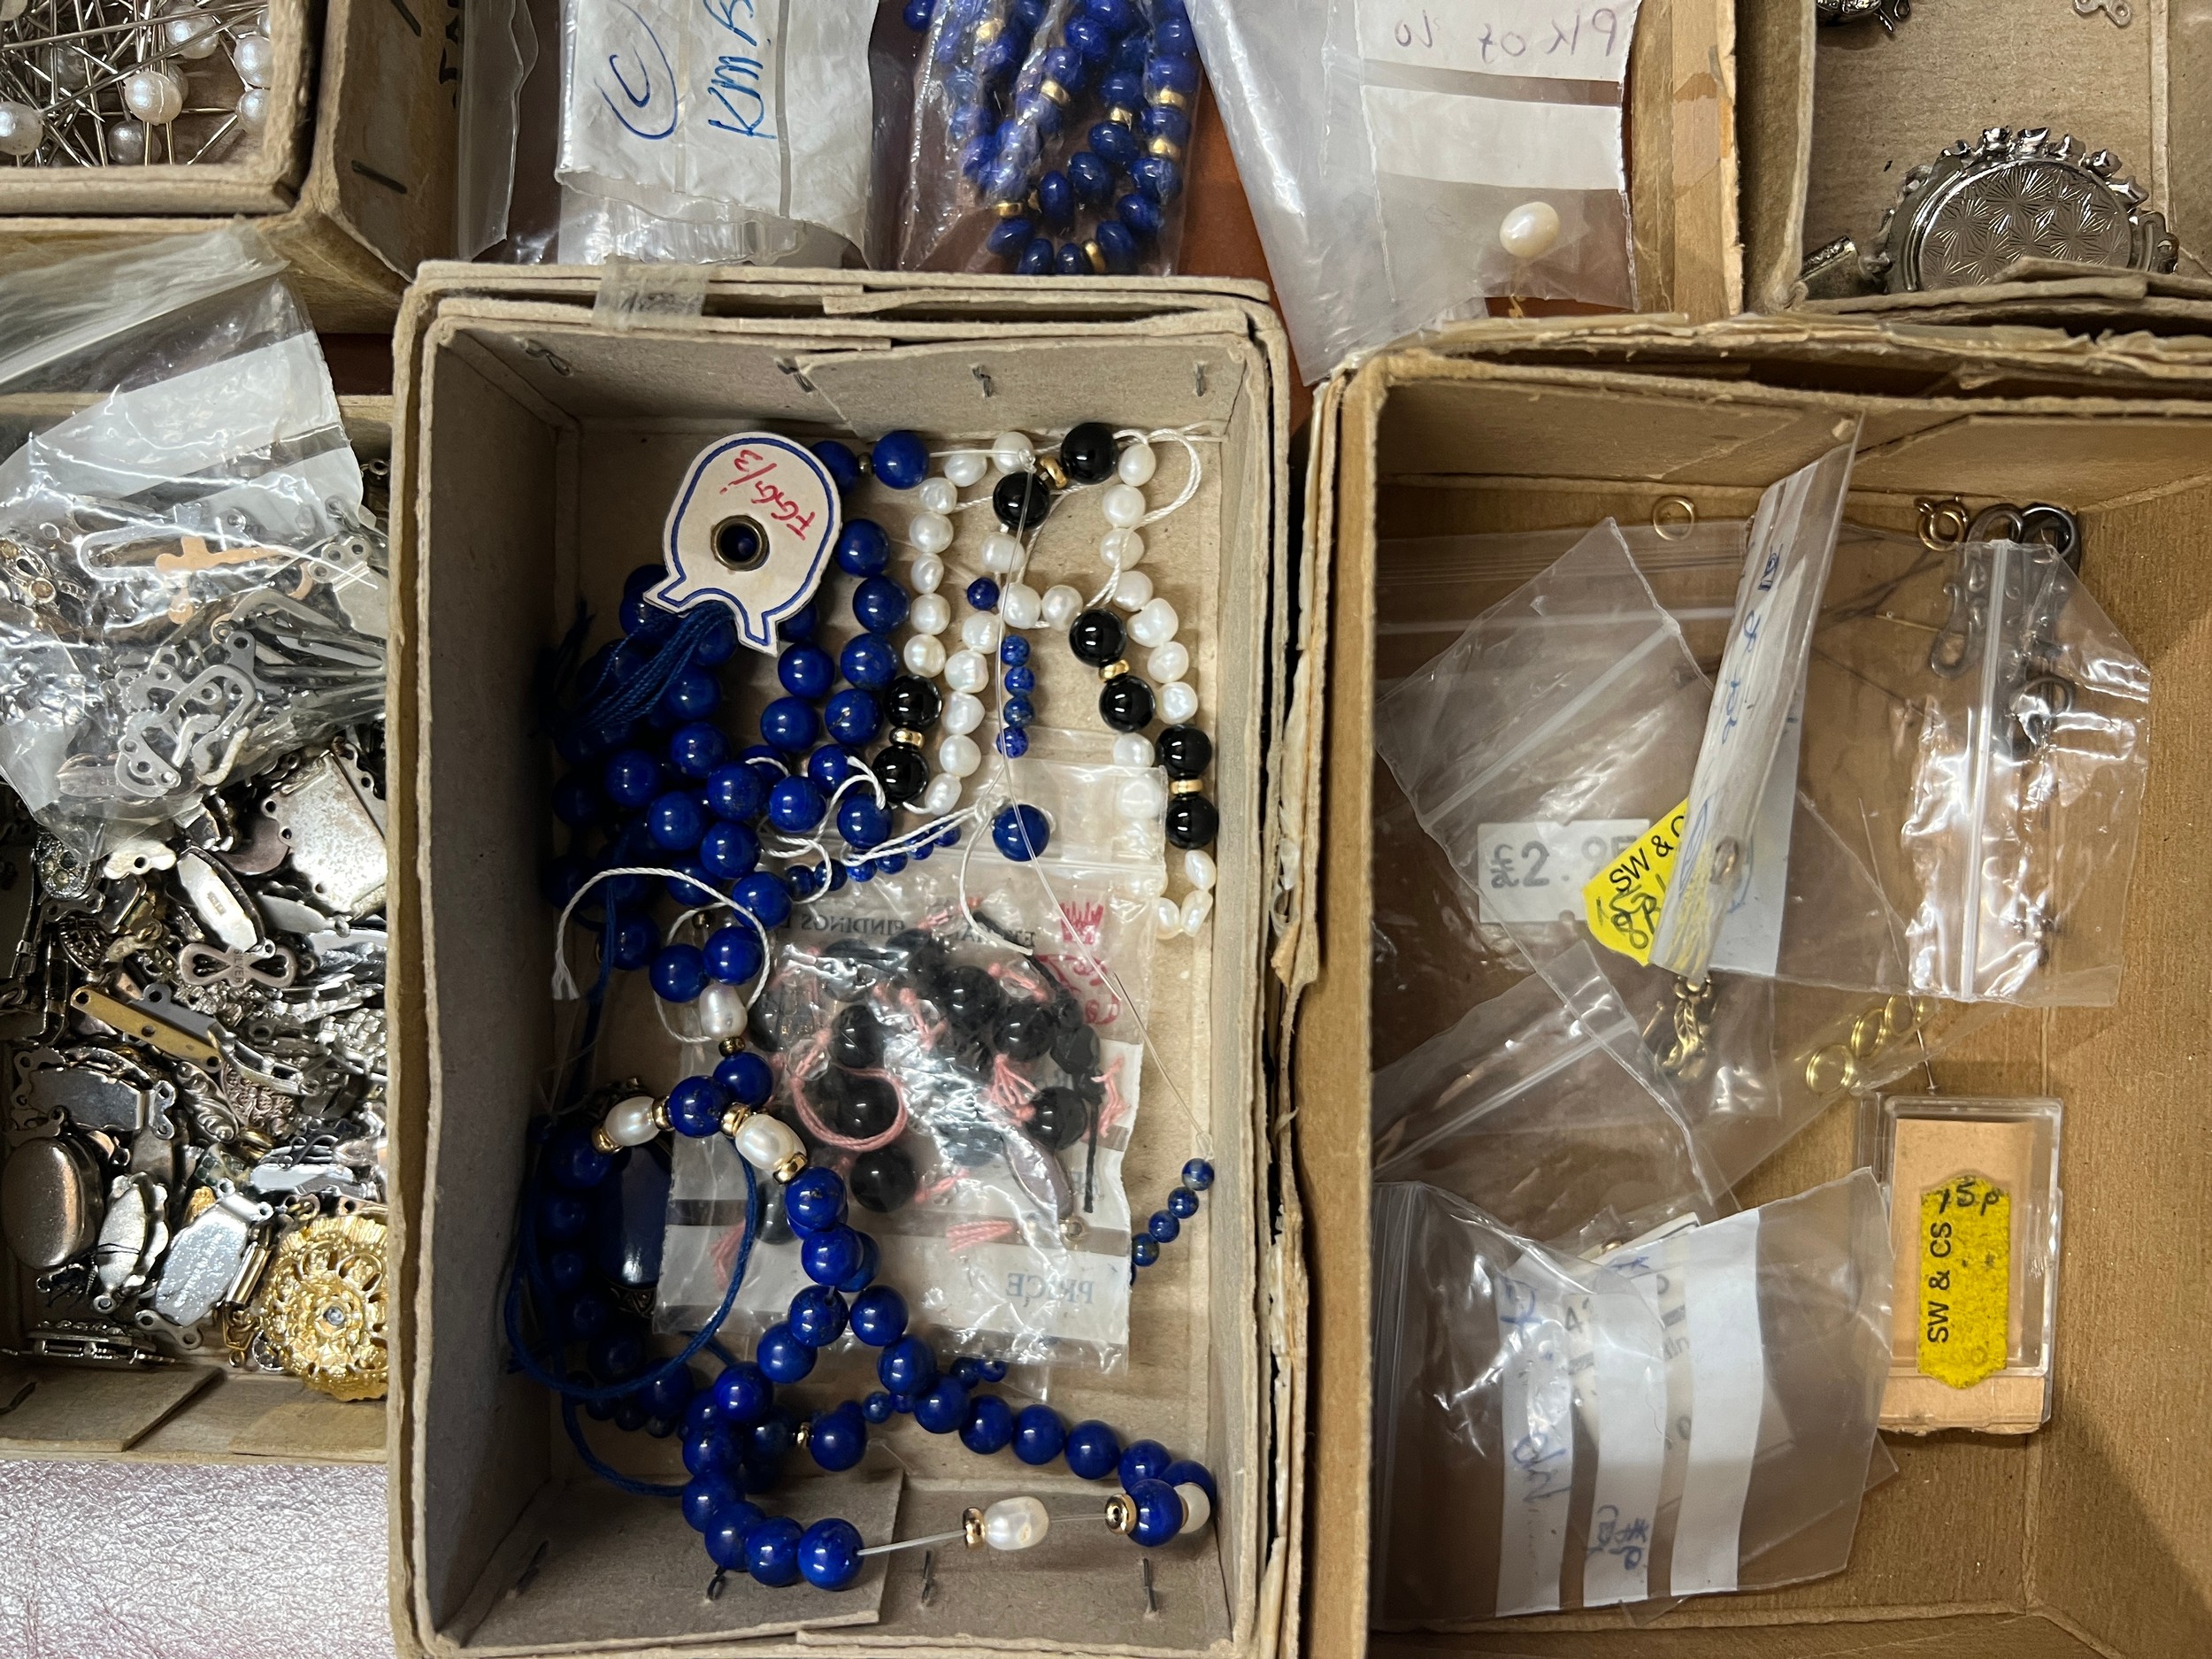 A quantity of jewellery fastenings, loose beads including lapis etc. - Image 3 of 5